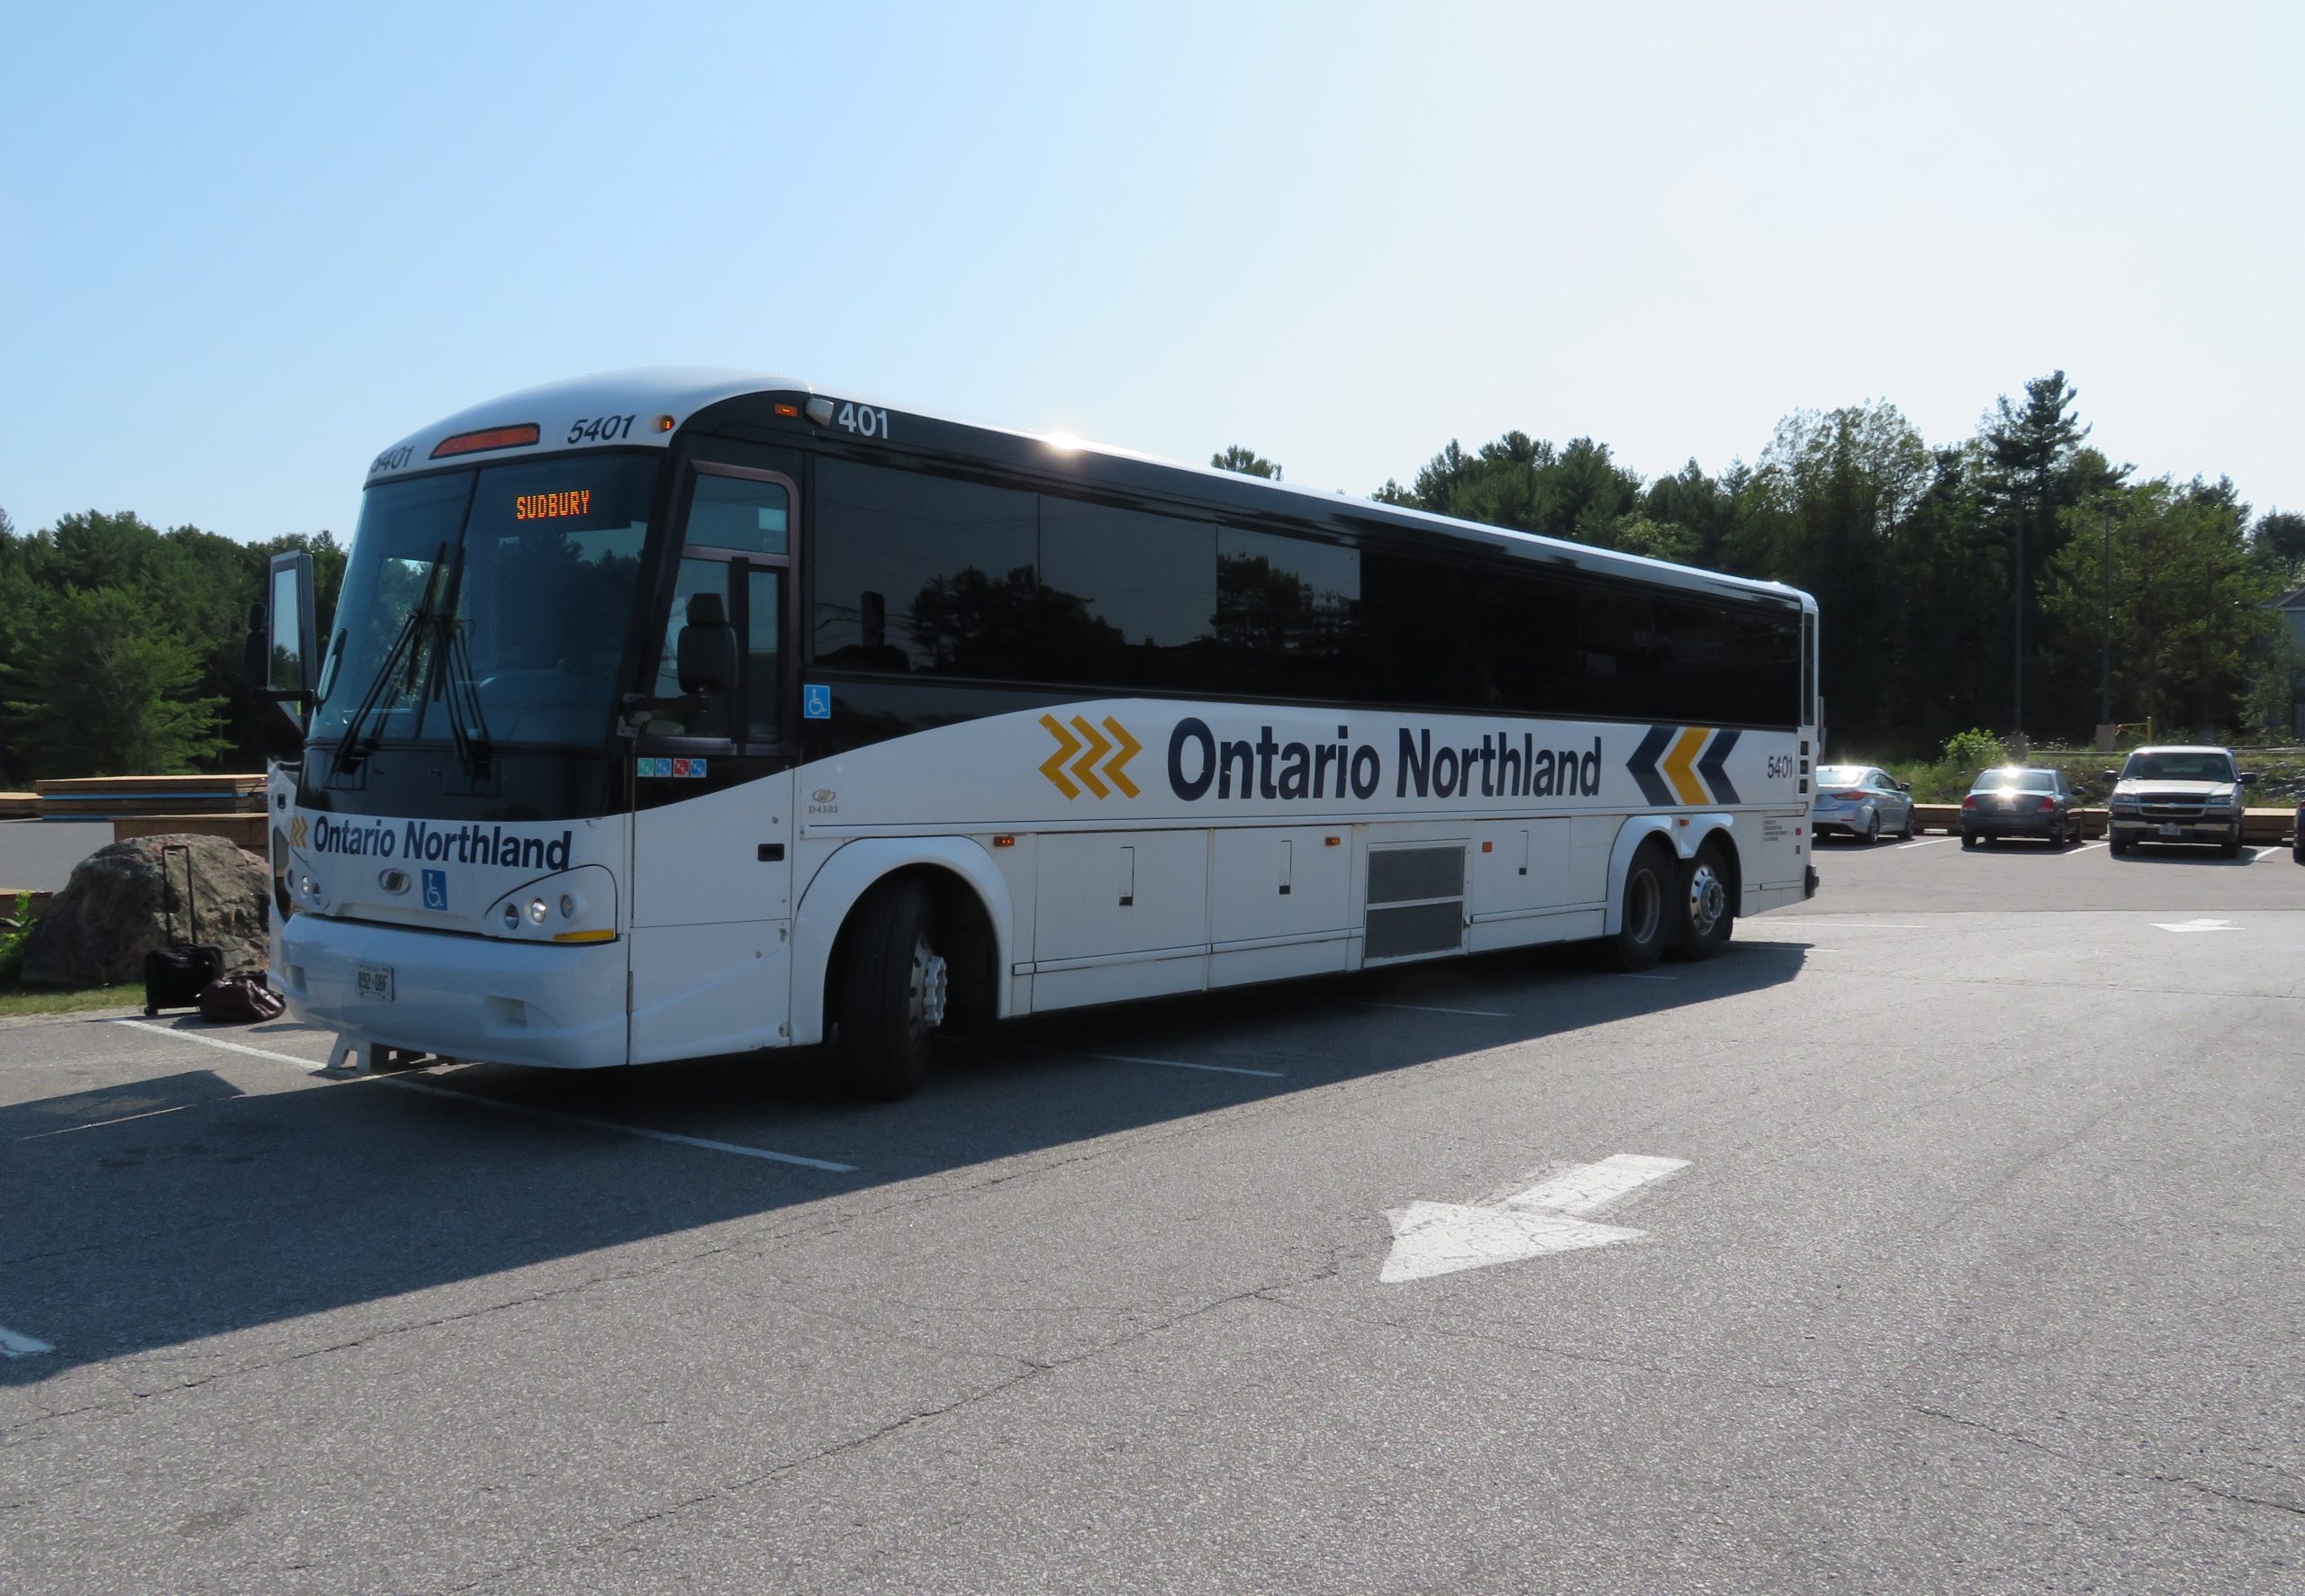 Photo of a white bus with white and yellow accents labelled "Ontario Northland"